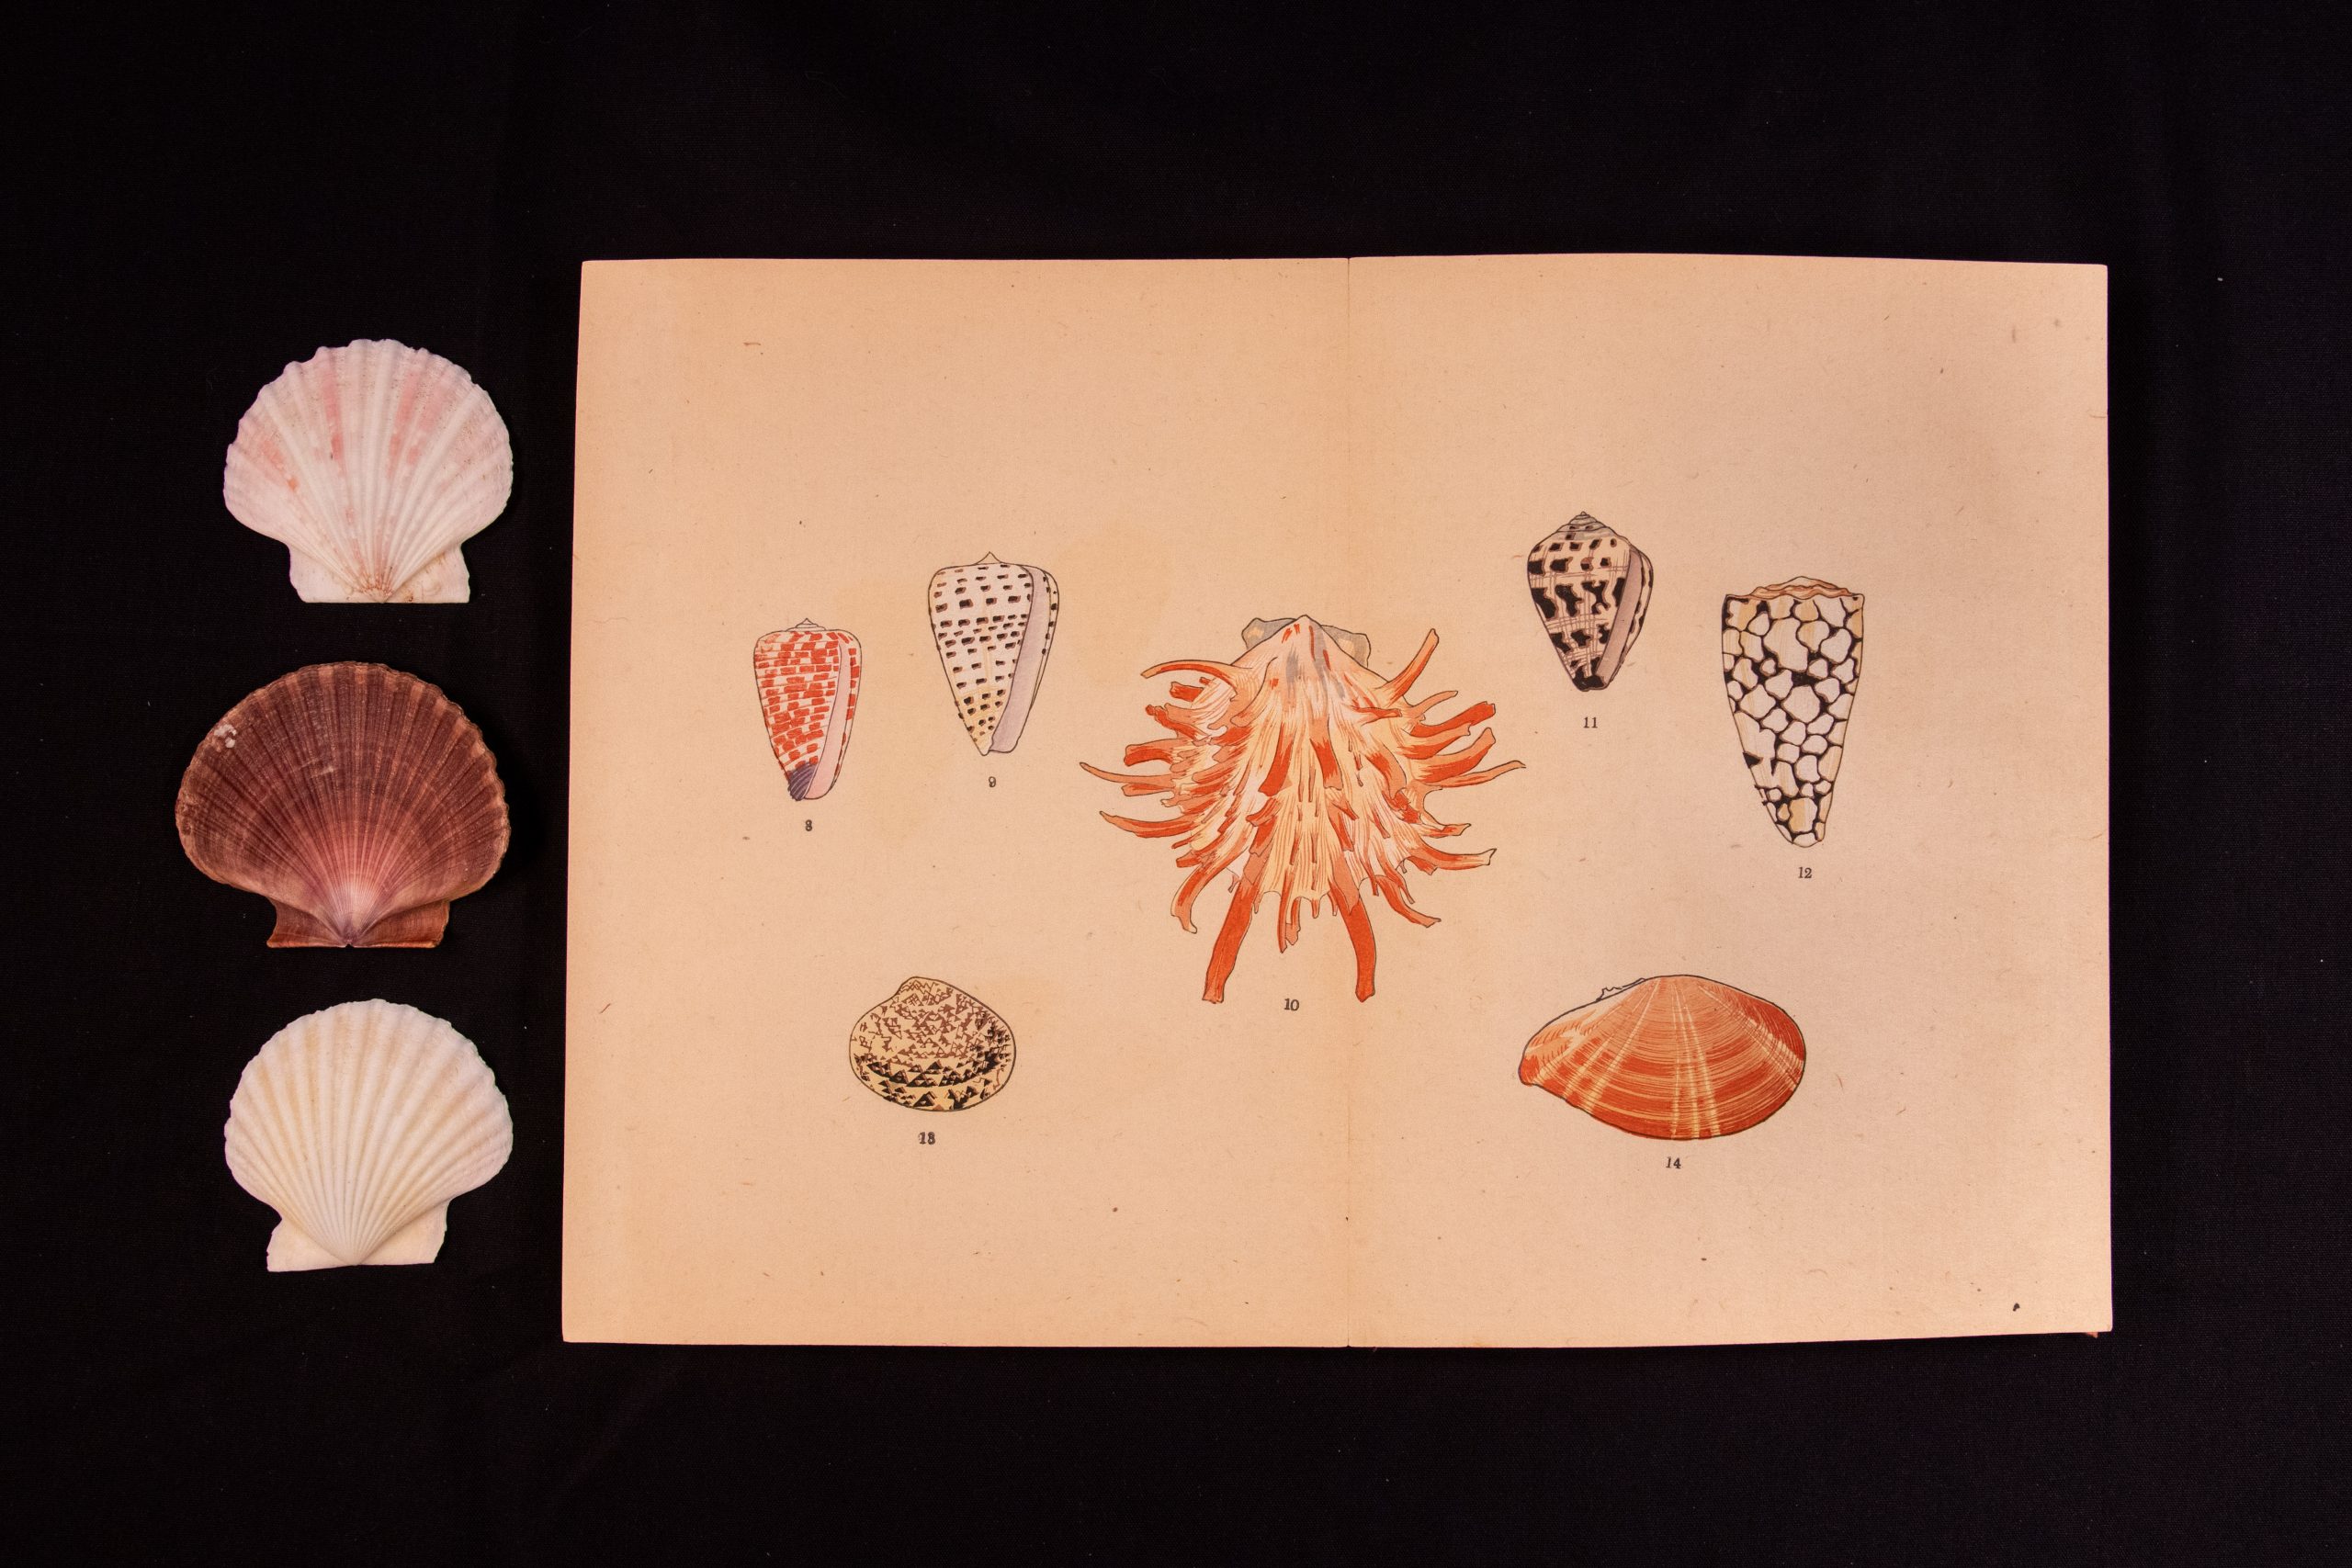 Open book showing color shell illustrations with 3 real shells lined up beside the book.